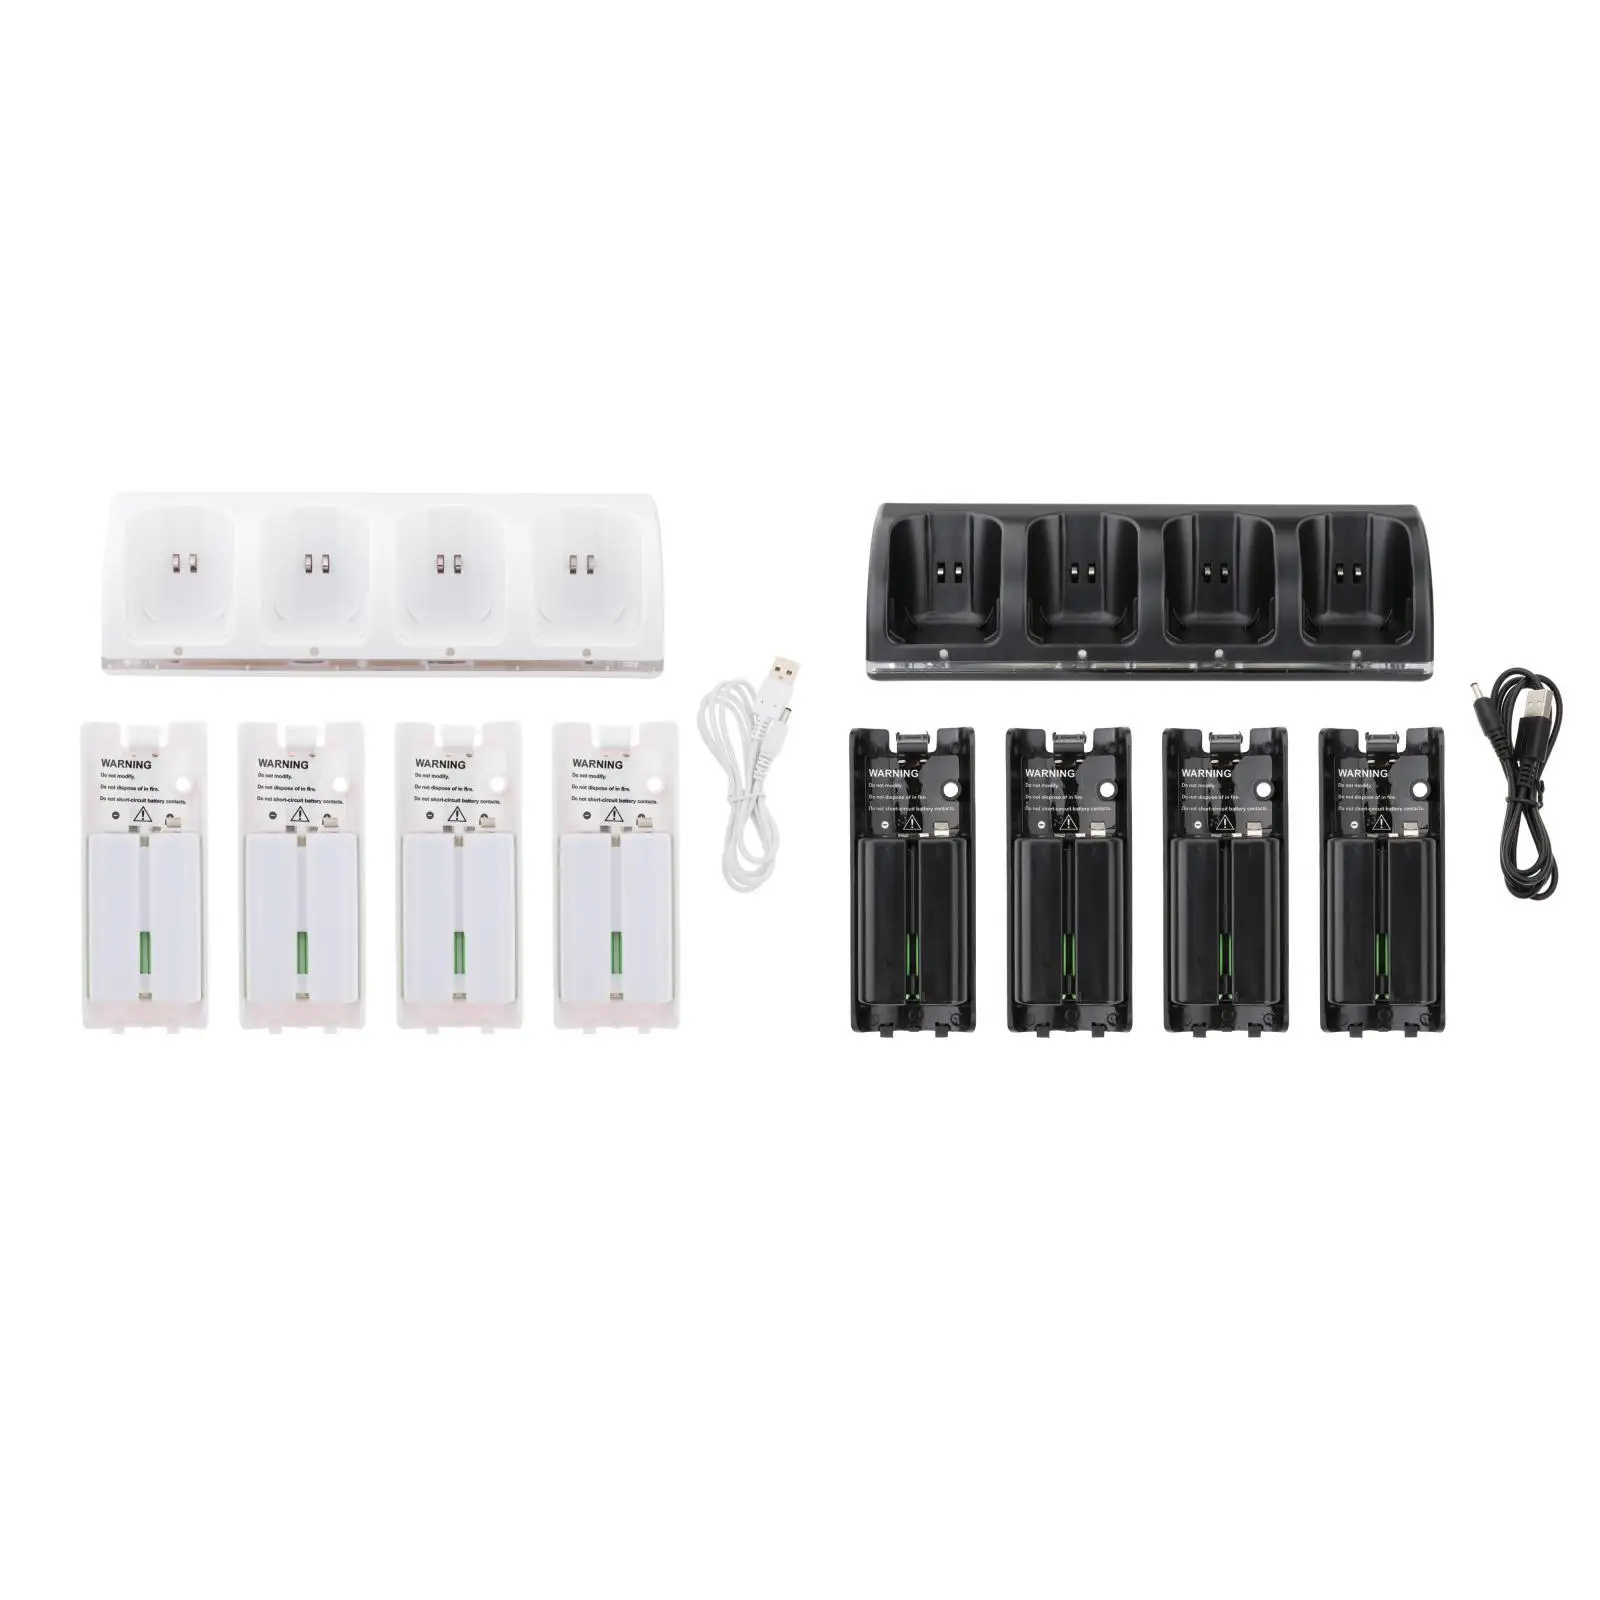  , Charging Dock Station with USB Cable 4Pcs 2800mAh Replacement Batteries for Wii Game Console Game Accessories